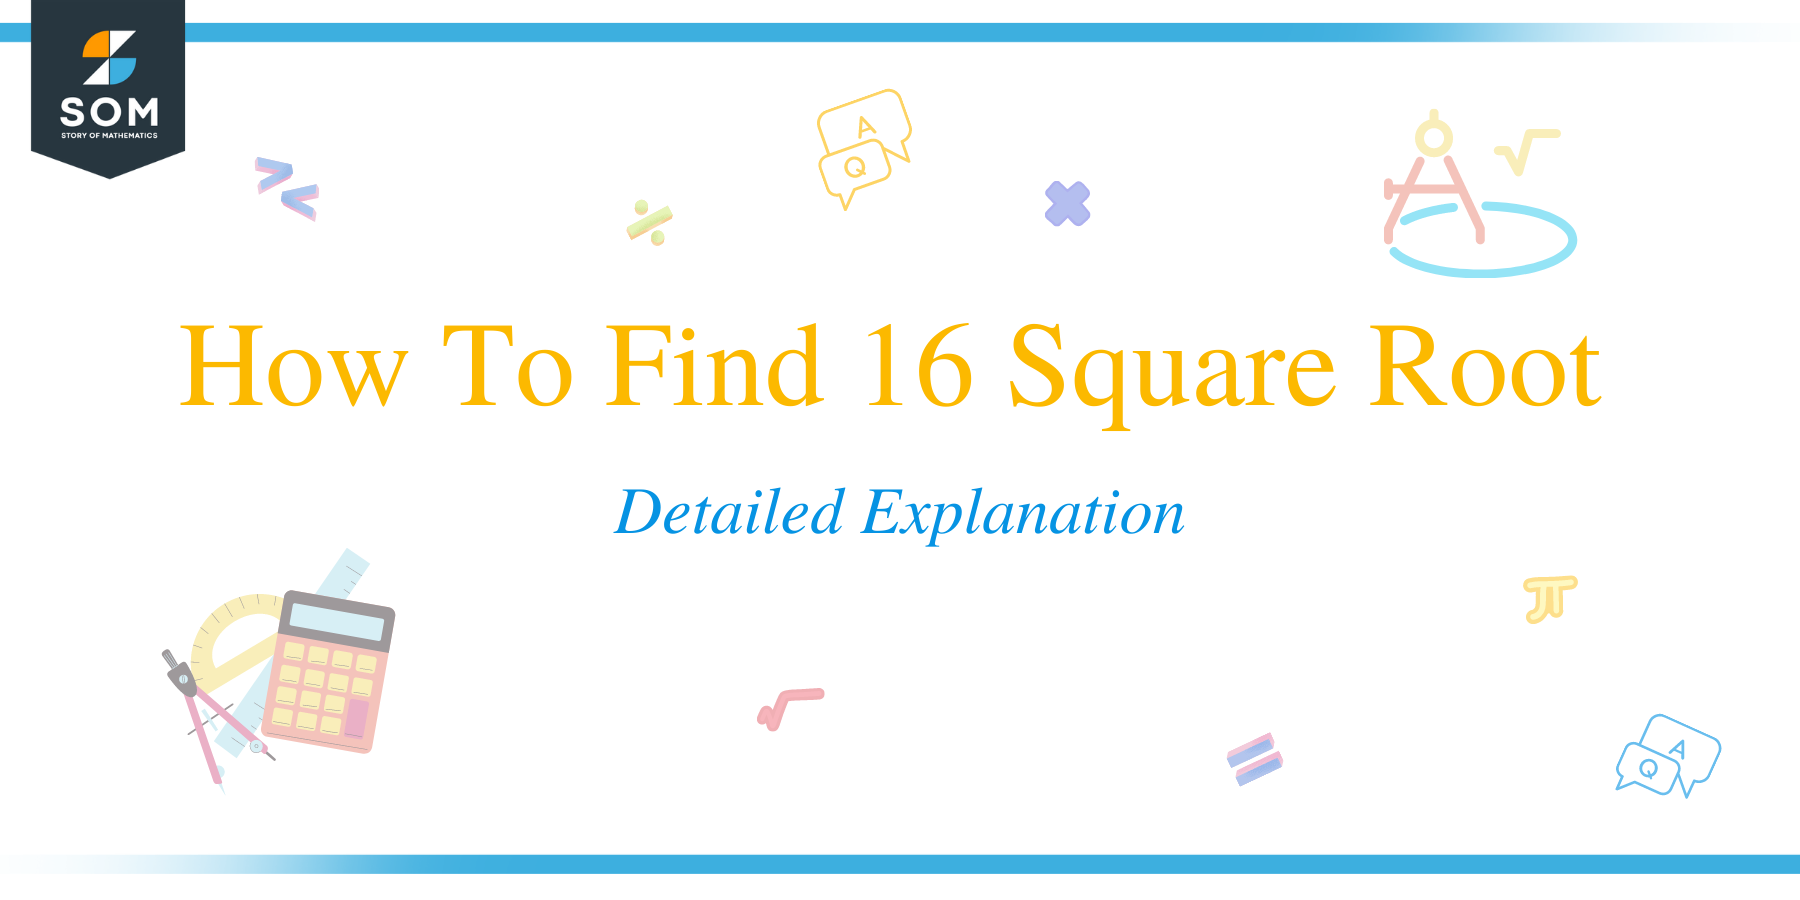 How To Find 16 Square Root